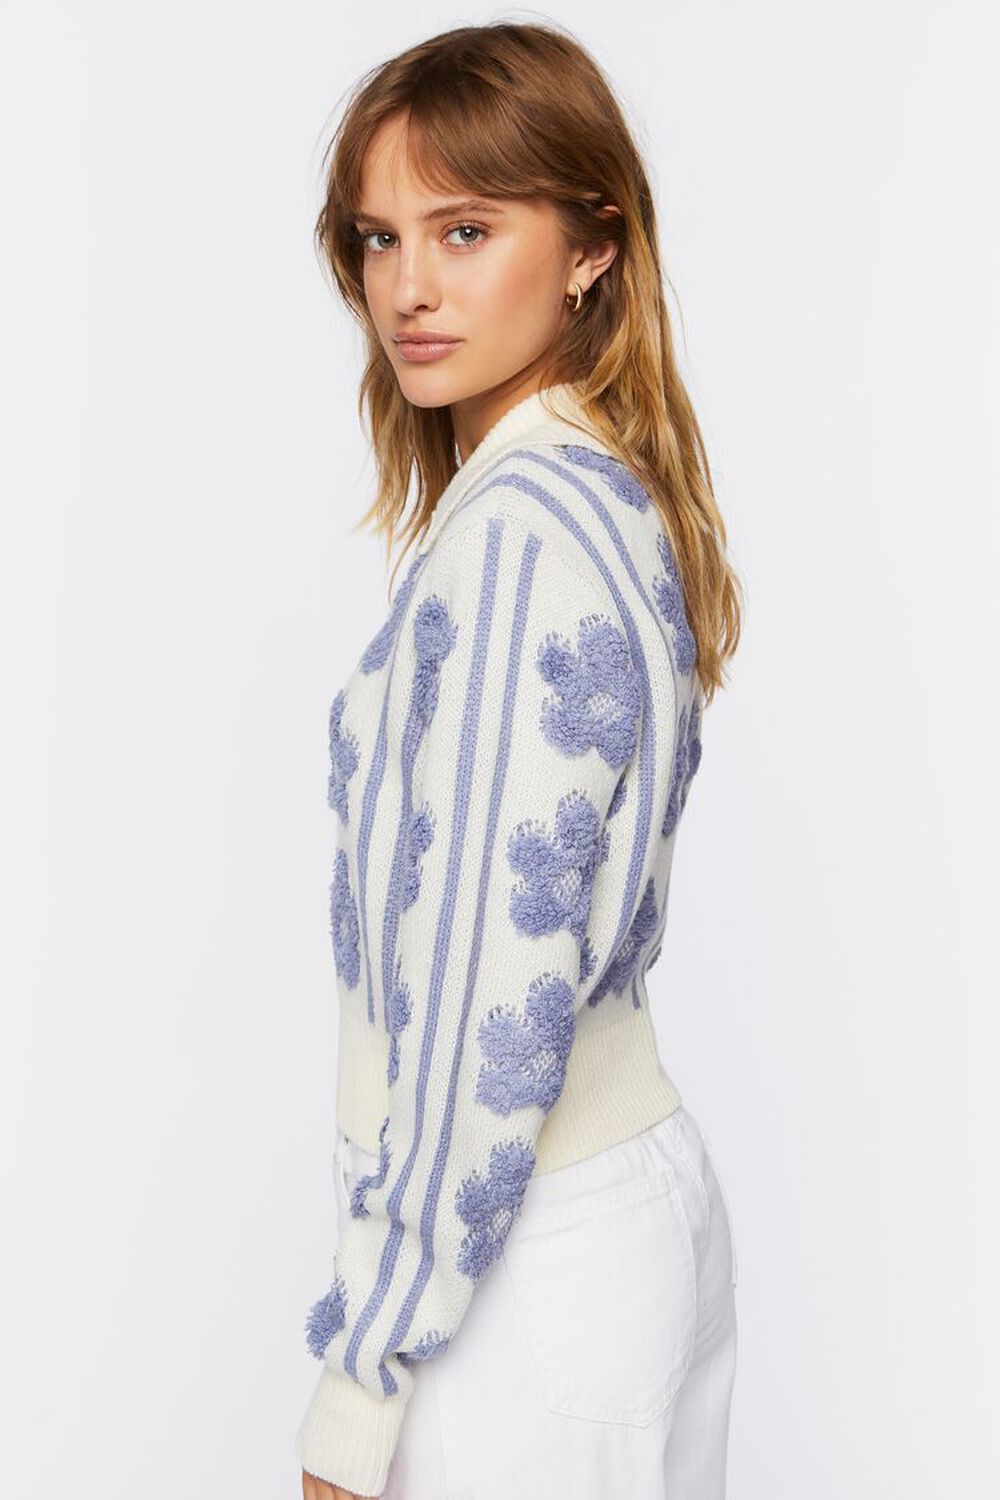 CREAM/BLUE Floral Print Sweater-Knit Top, image 2